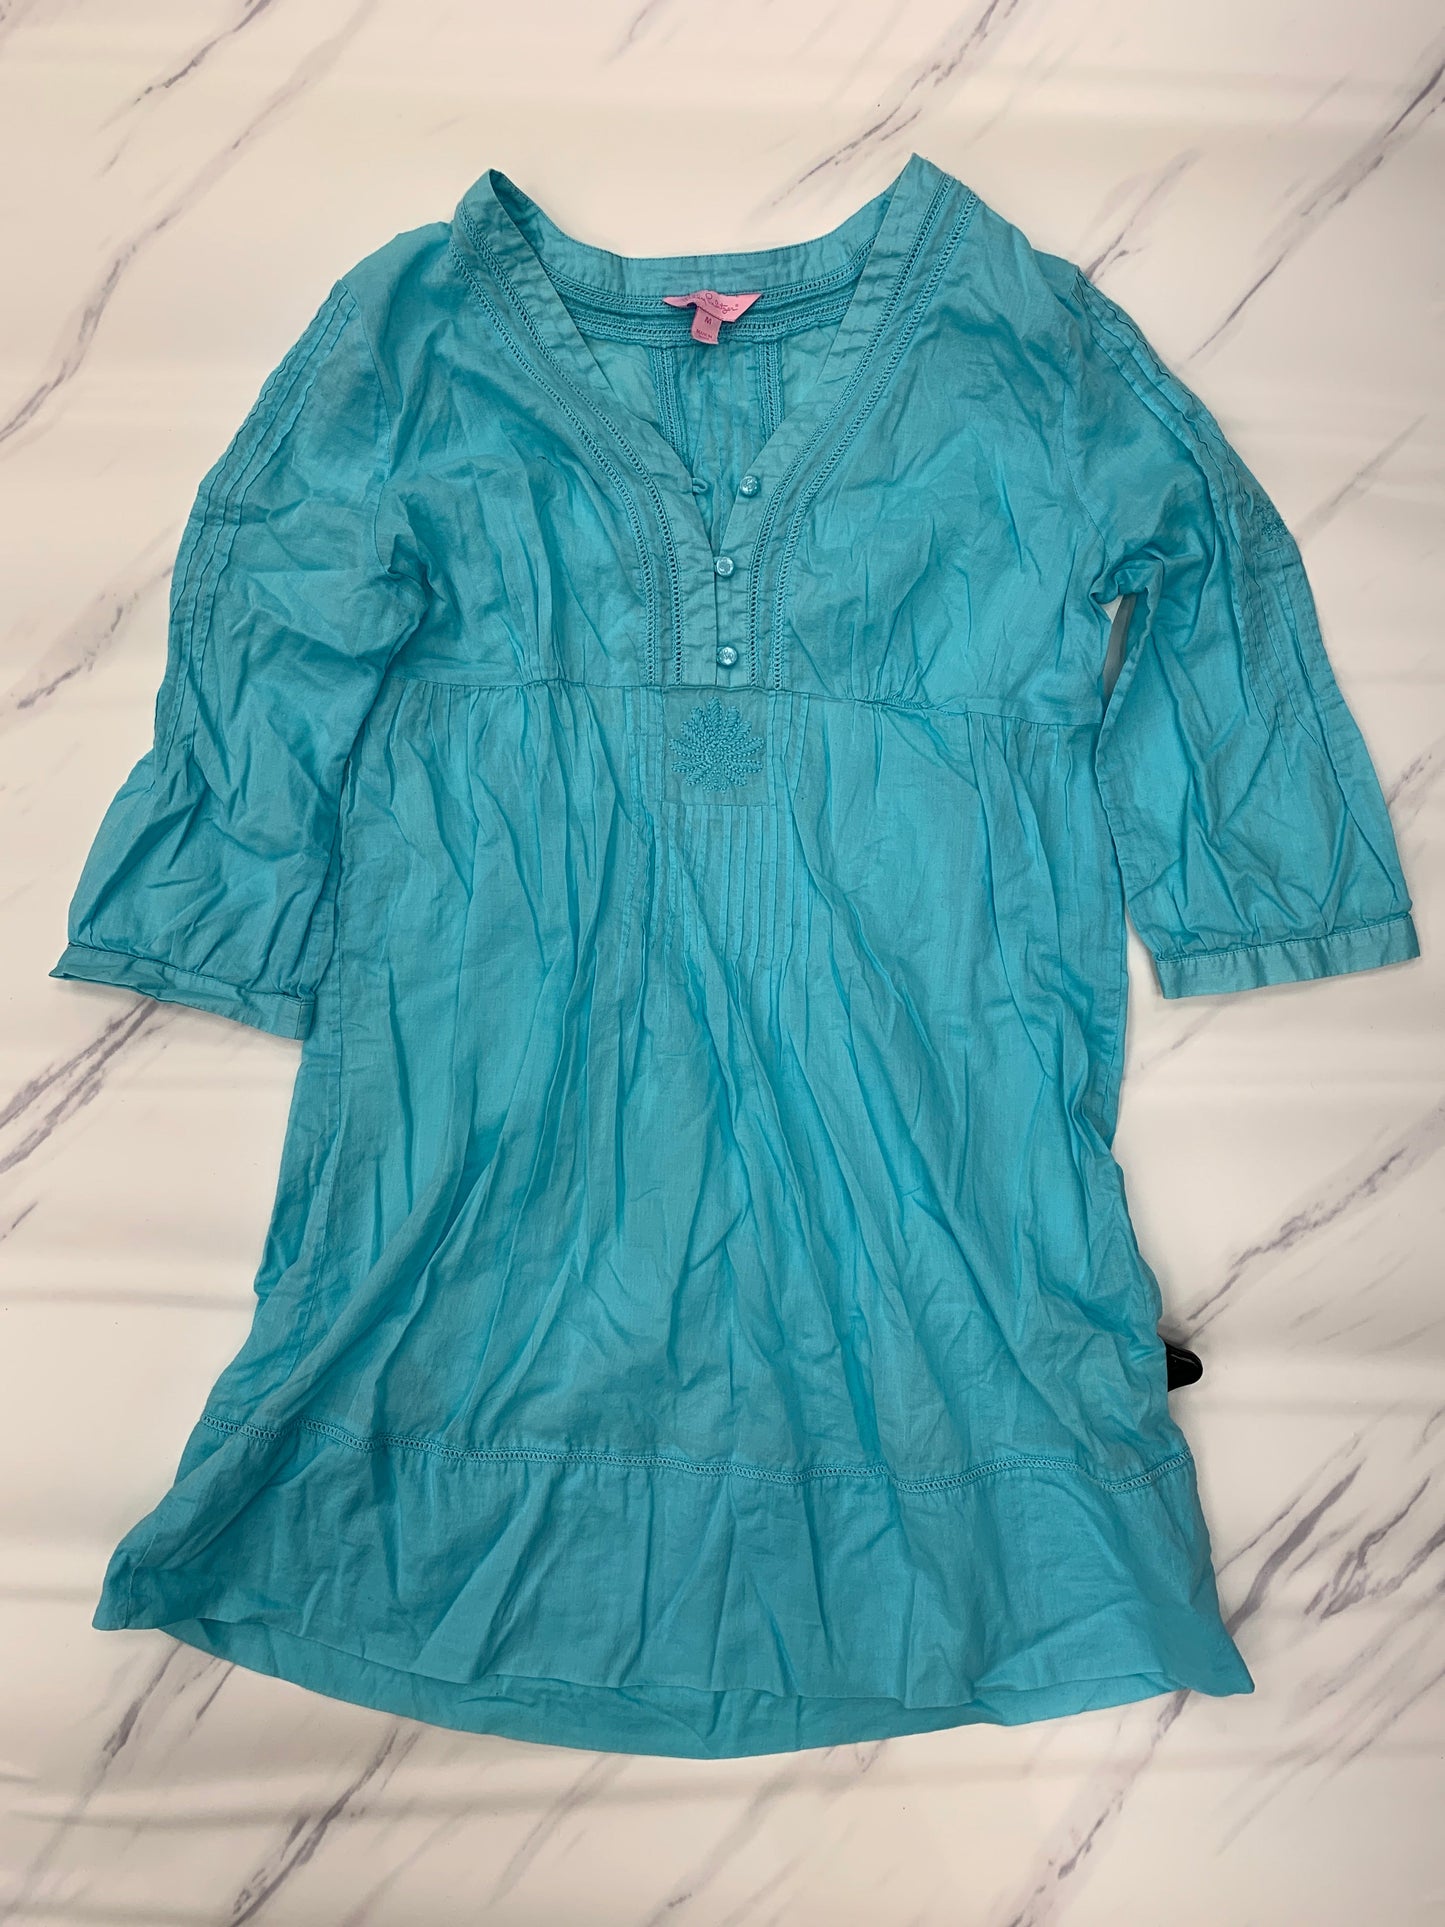 Coverup By Lilly Pulitzer  Size: M